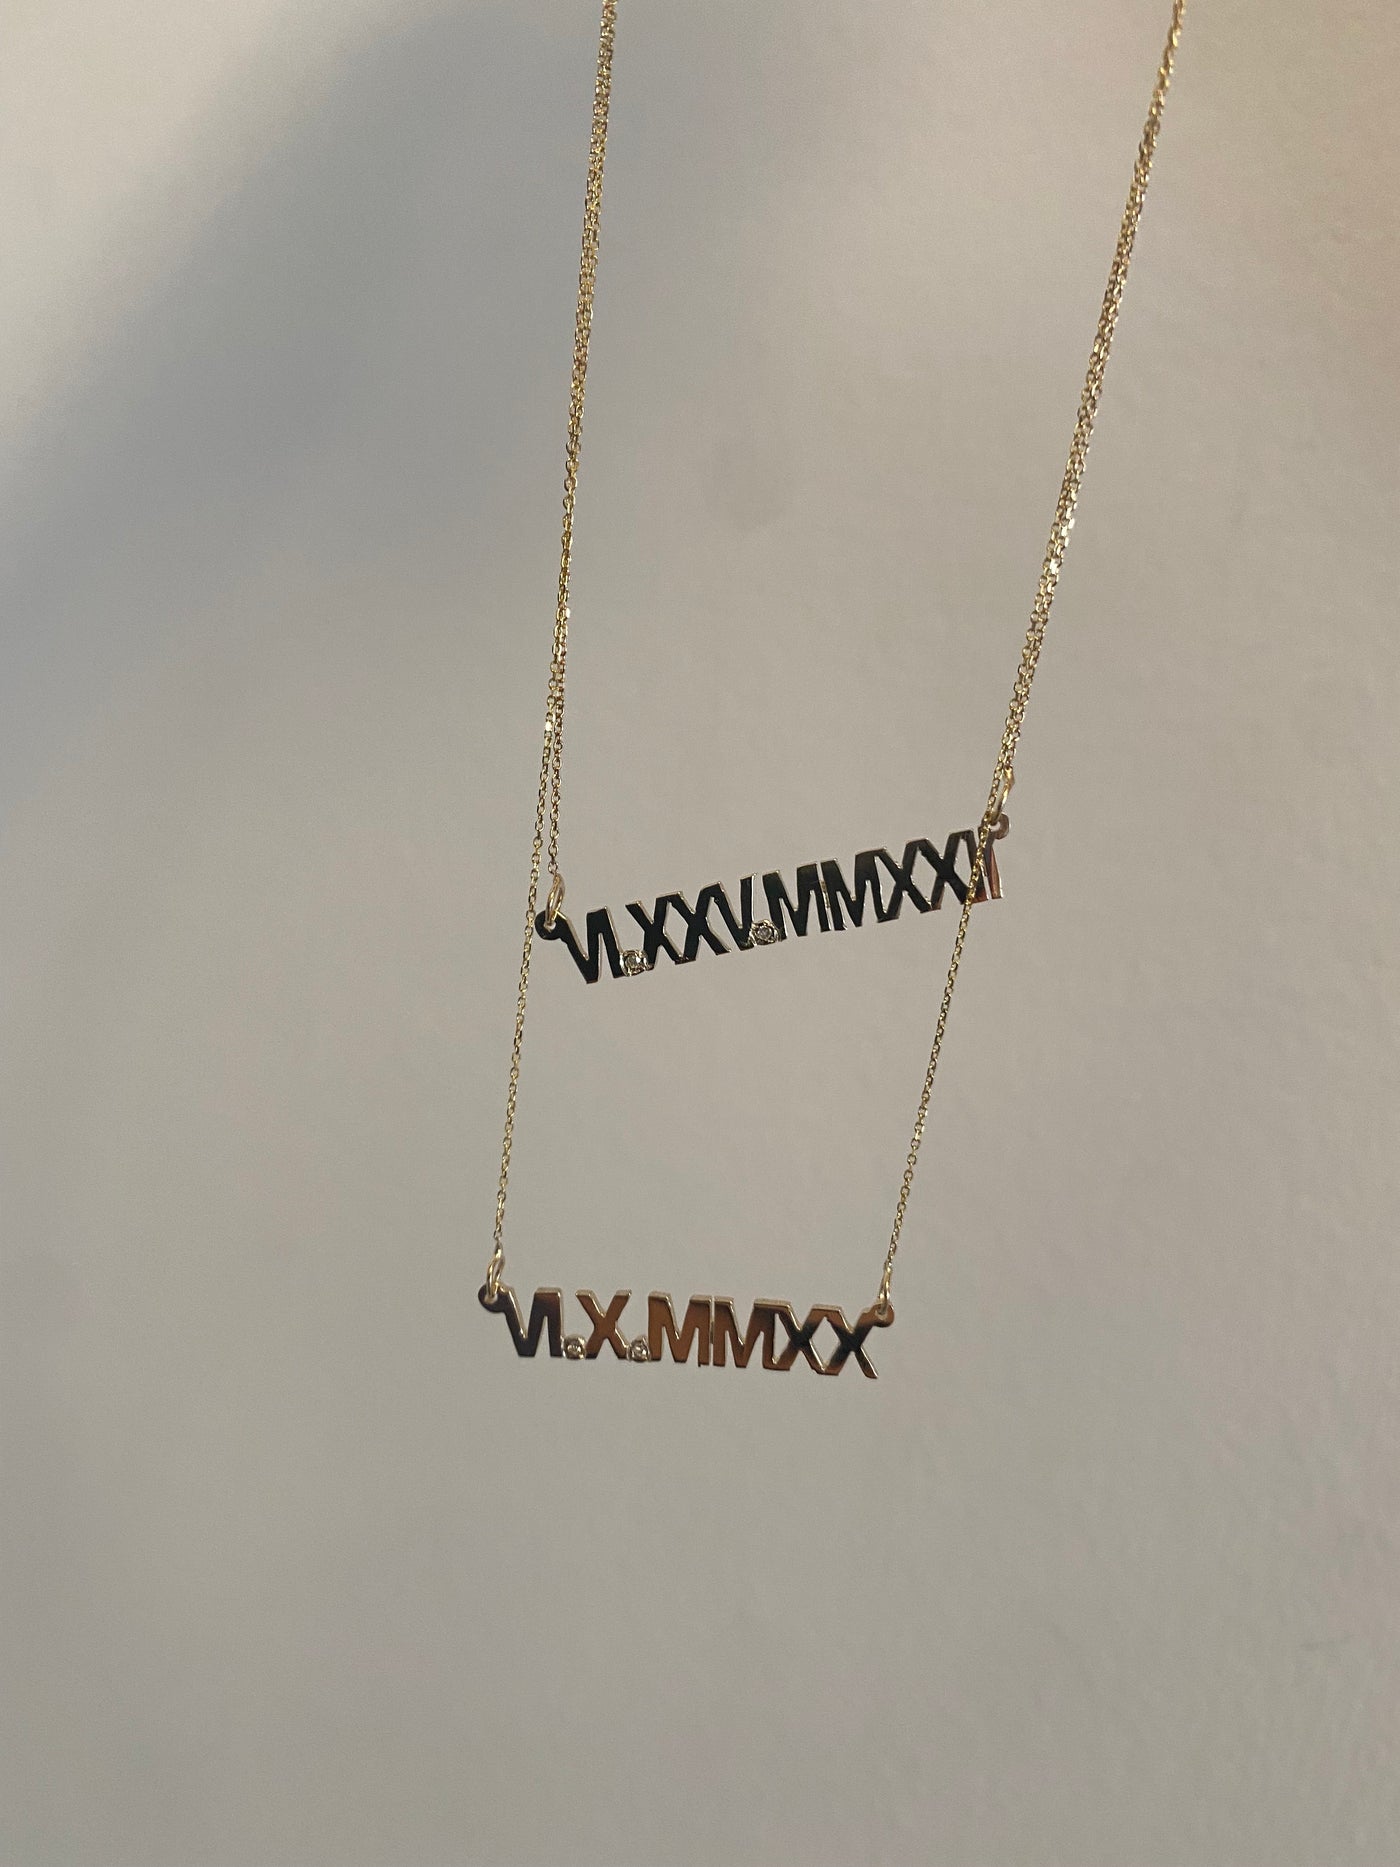 IVY - The Roman Numeral Necklace